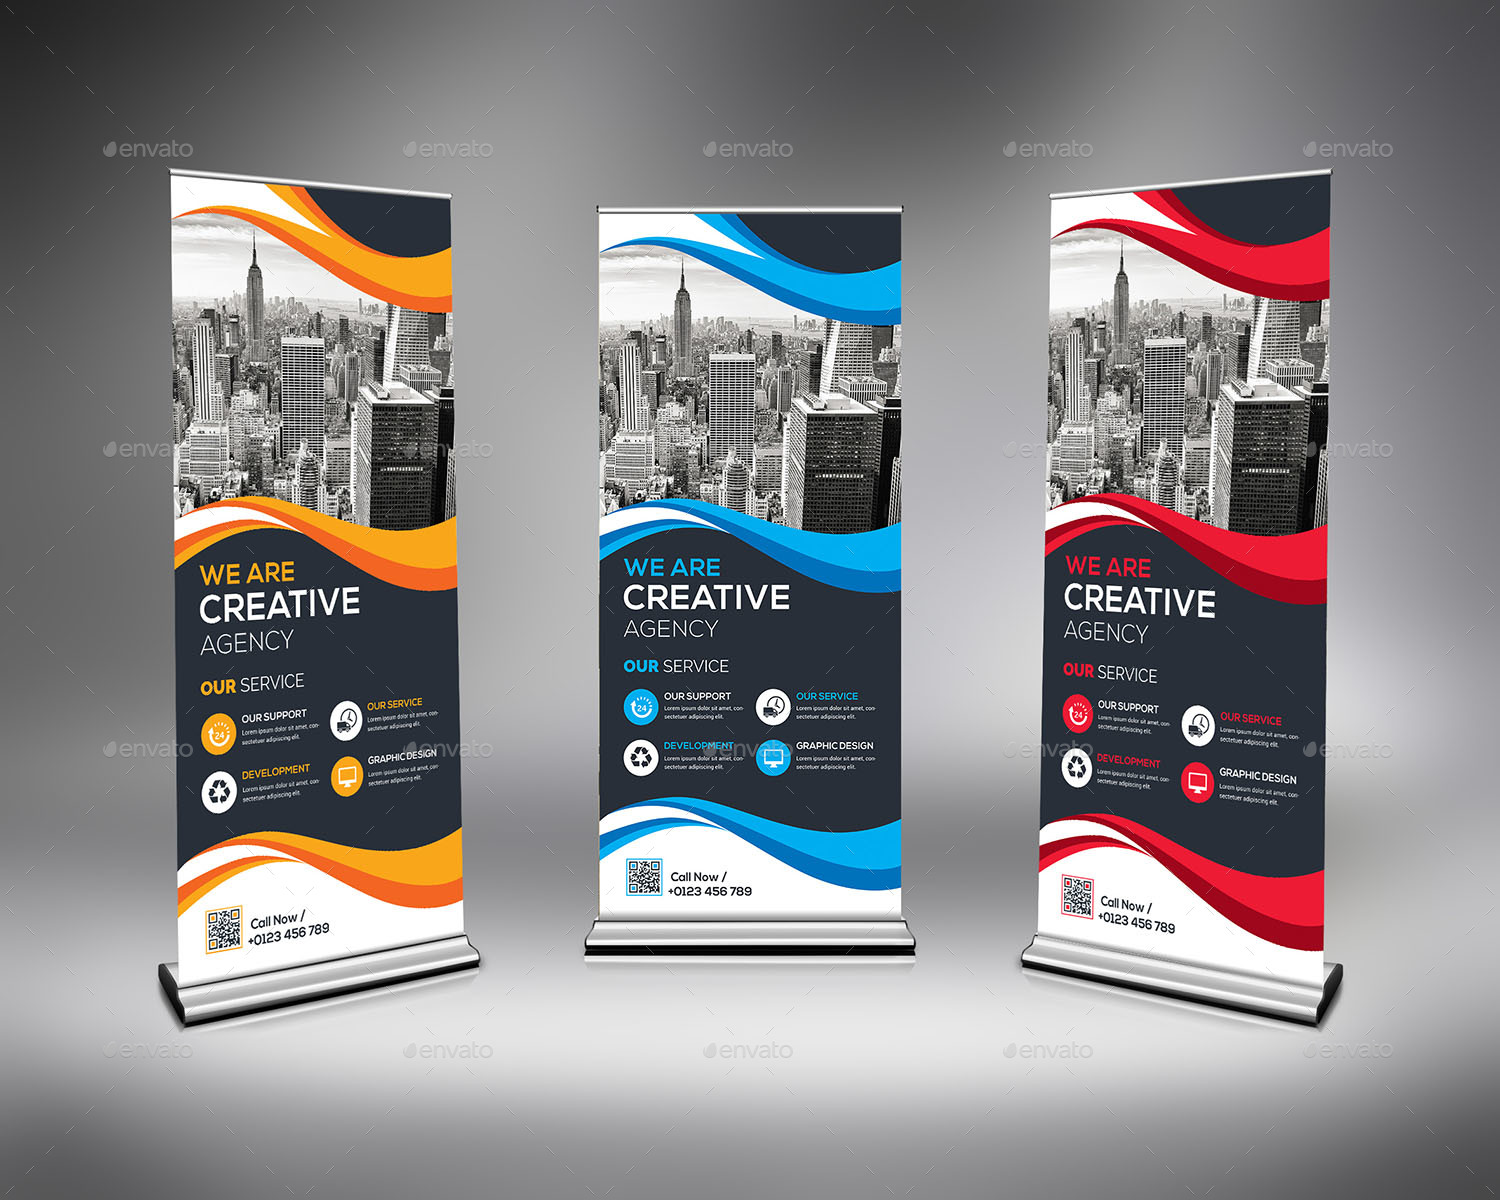 Roll-Up Banner Bundle_2 in 1, Print Templates | GraphicRiver